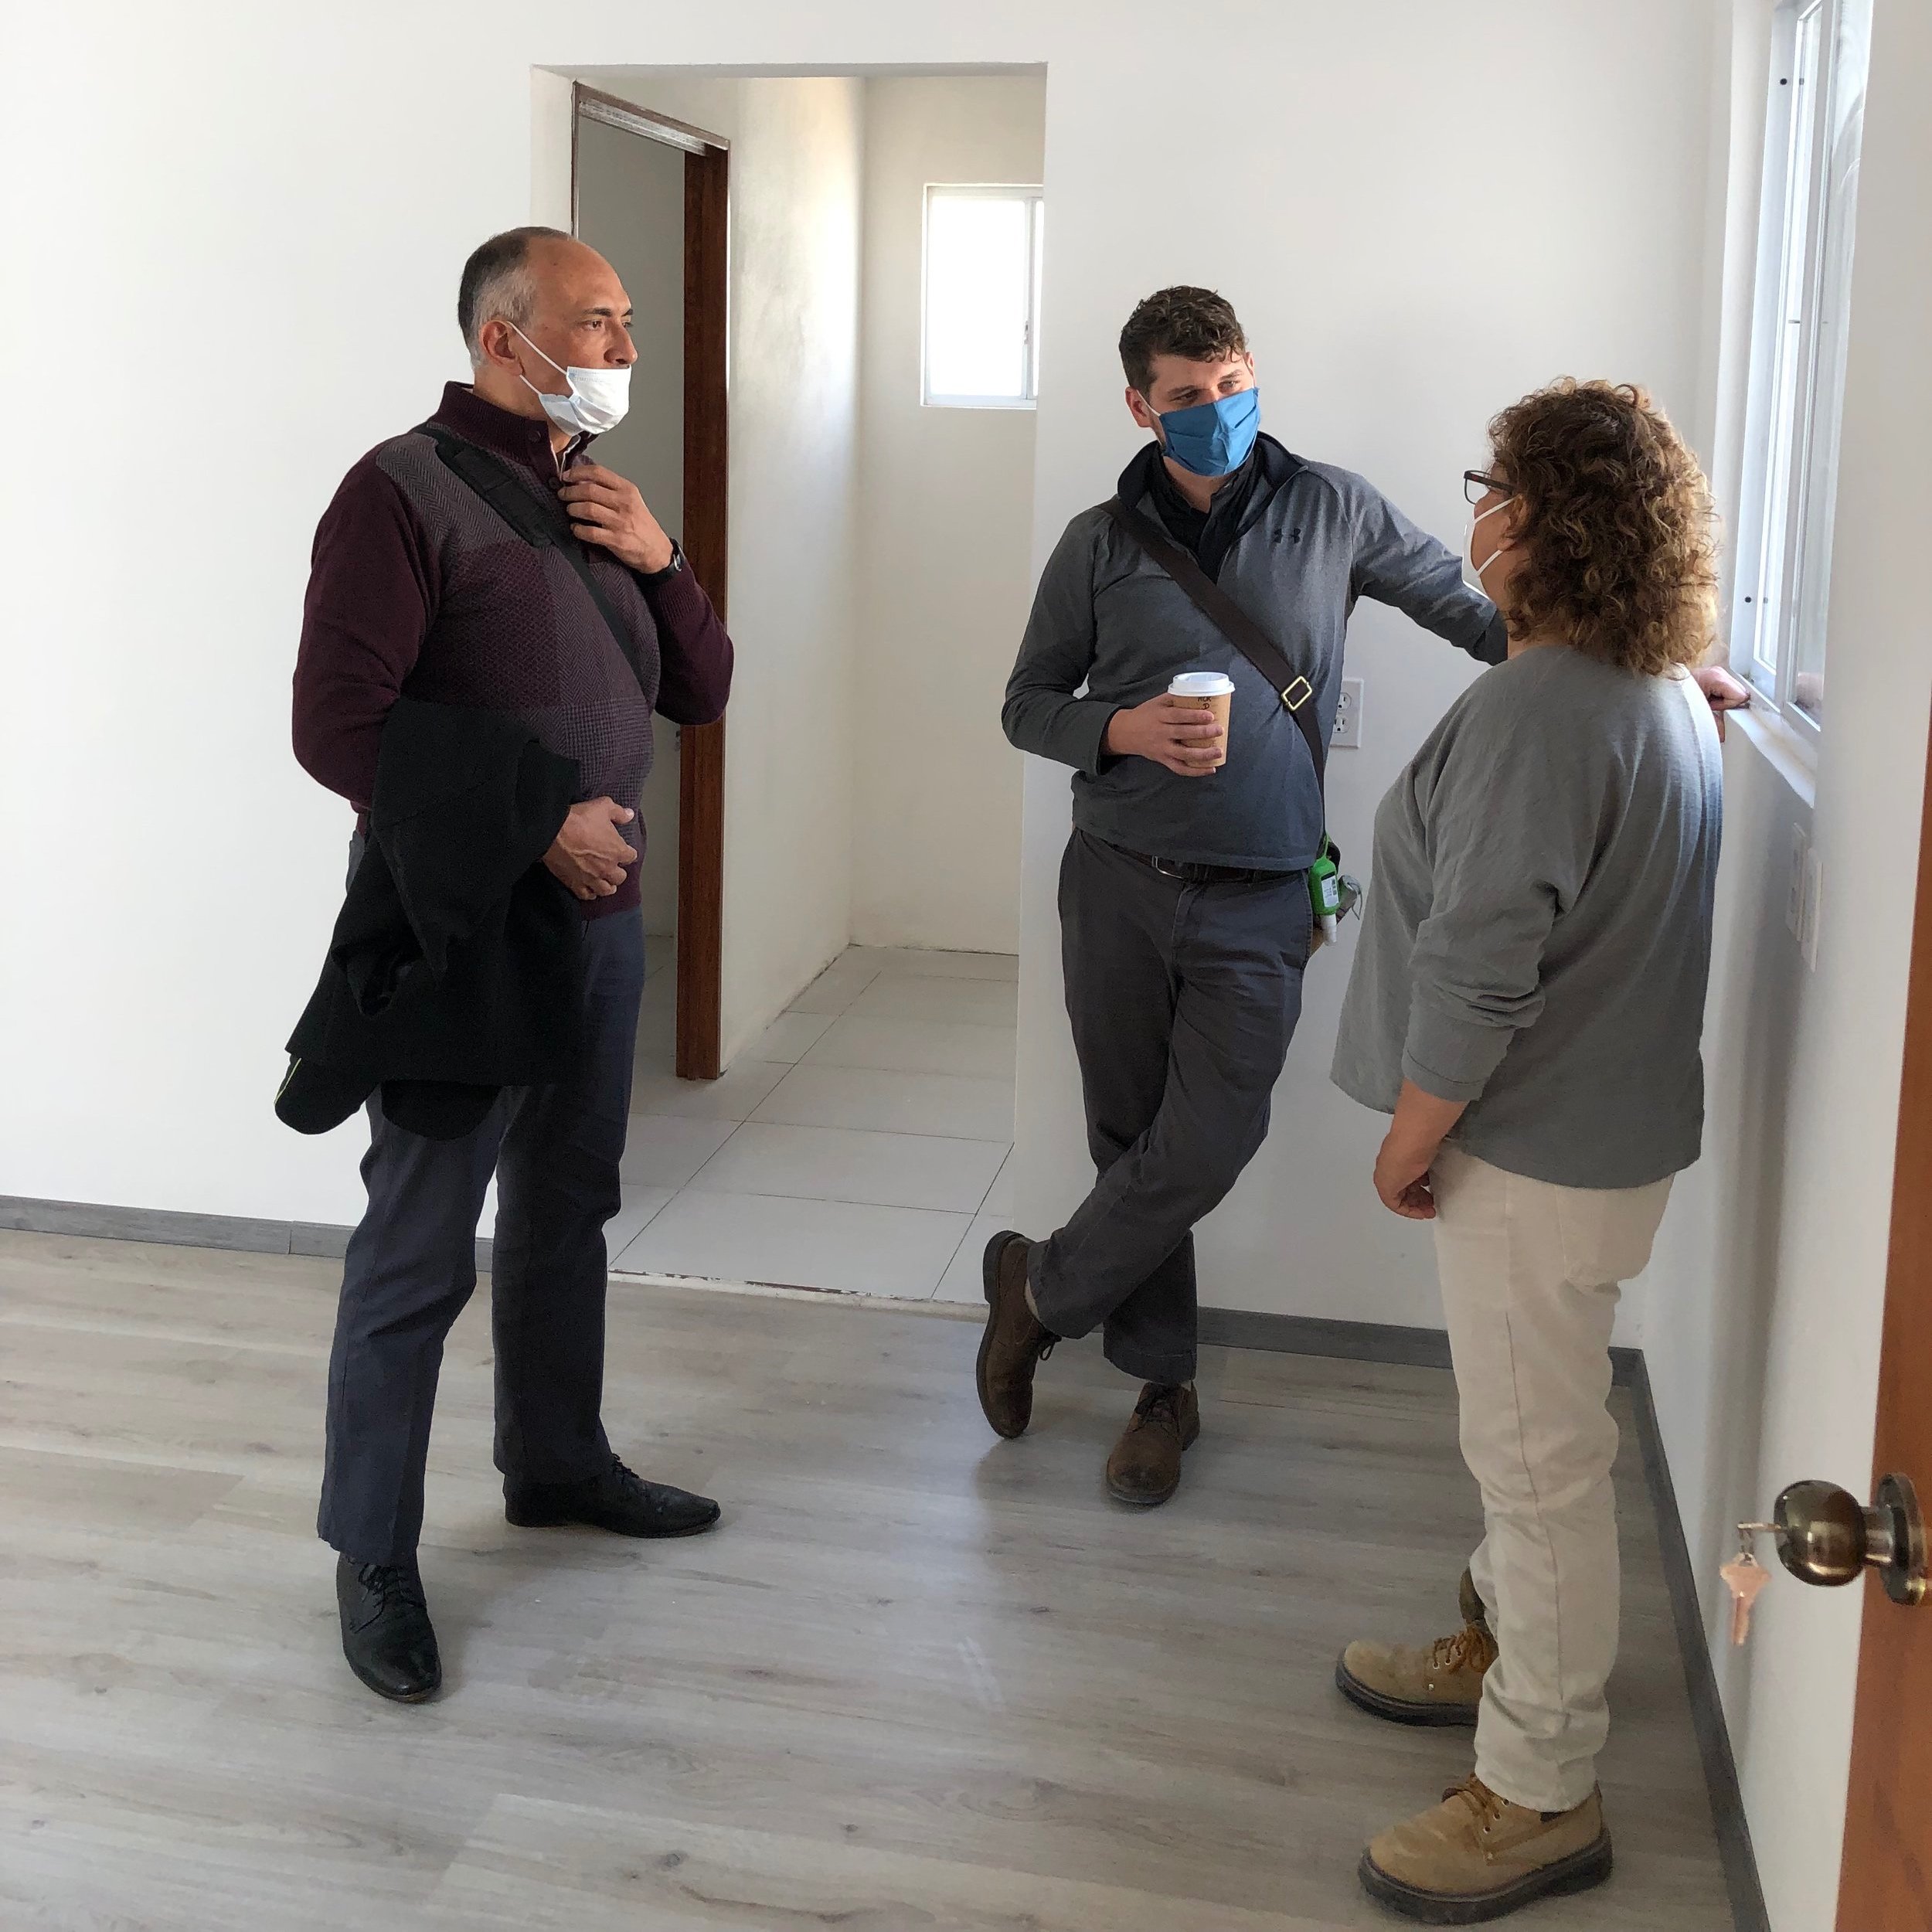  Rev. Roberto Federico Trejo Haager, Pastor President of the Iglesia Luterana Mexicana, talks with Michael Busbey, ELCA Regional Representative for Mexico and Central America, and the architect working on the house. 